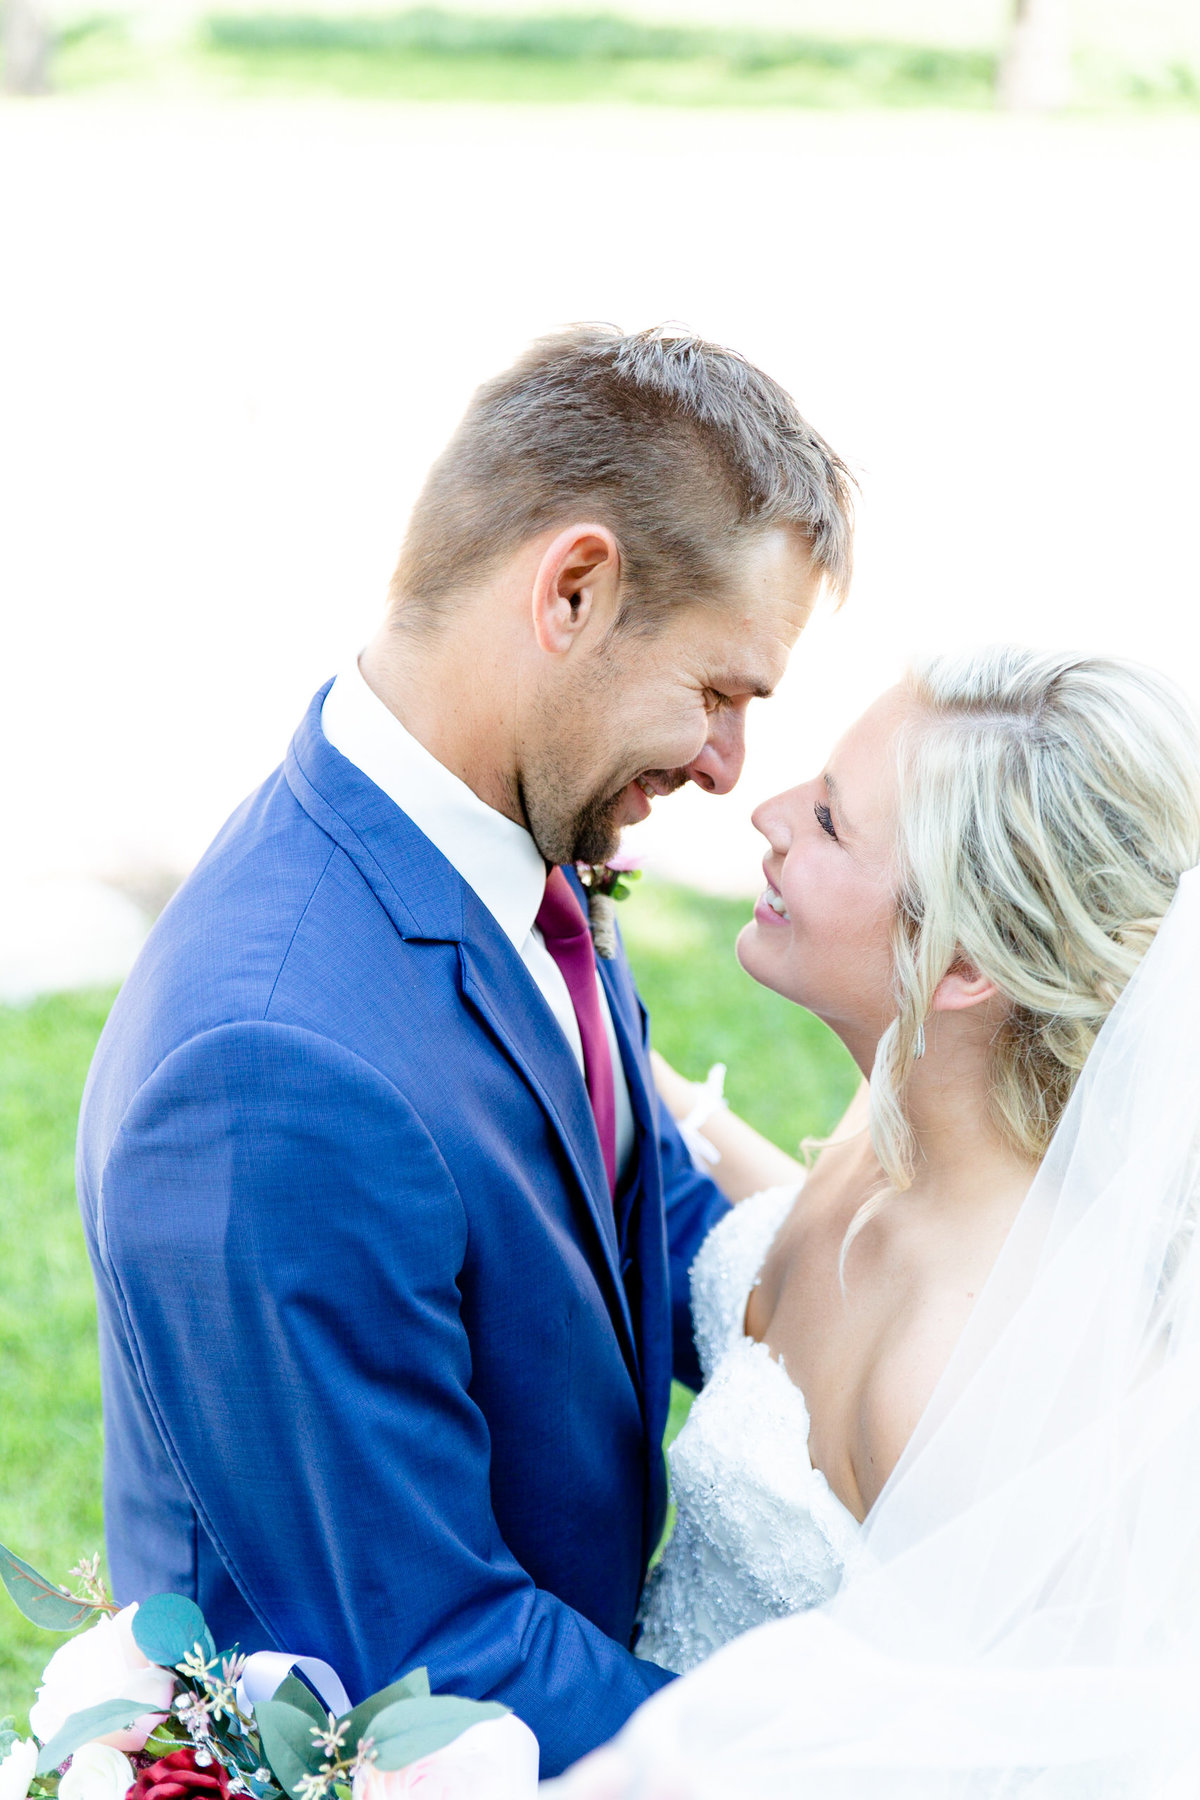 Bride and groom share a moment of joy before wedding ceremony begins